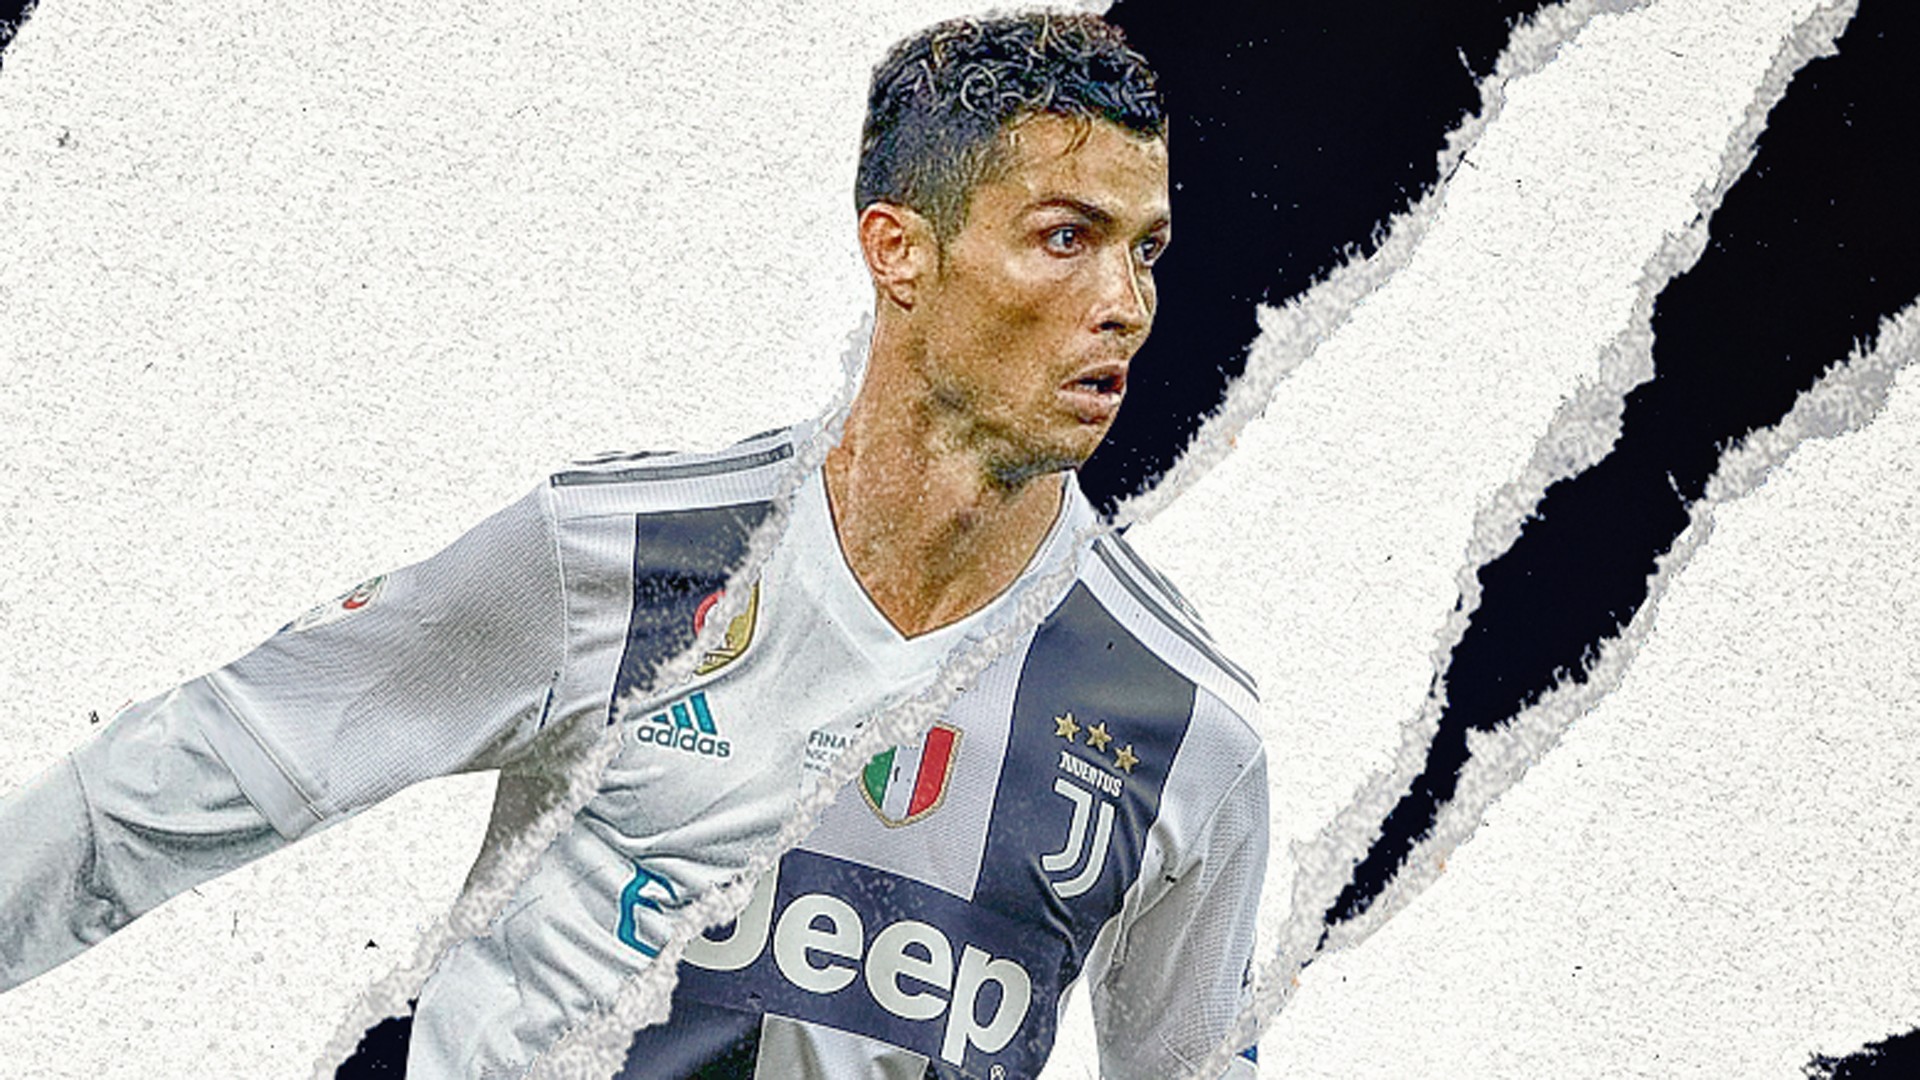 HD Wallpaper C Ronaldo Juventus with image resolution 1920x1080 pixel. You can make this wallpaper for your Desktop Computer Backgrounds, Mac Wallpapers, Android Lock screen or iPhone Screensavers